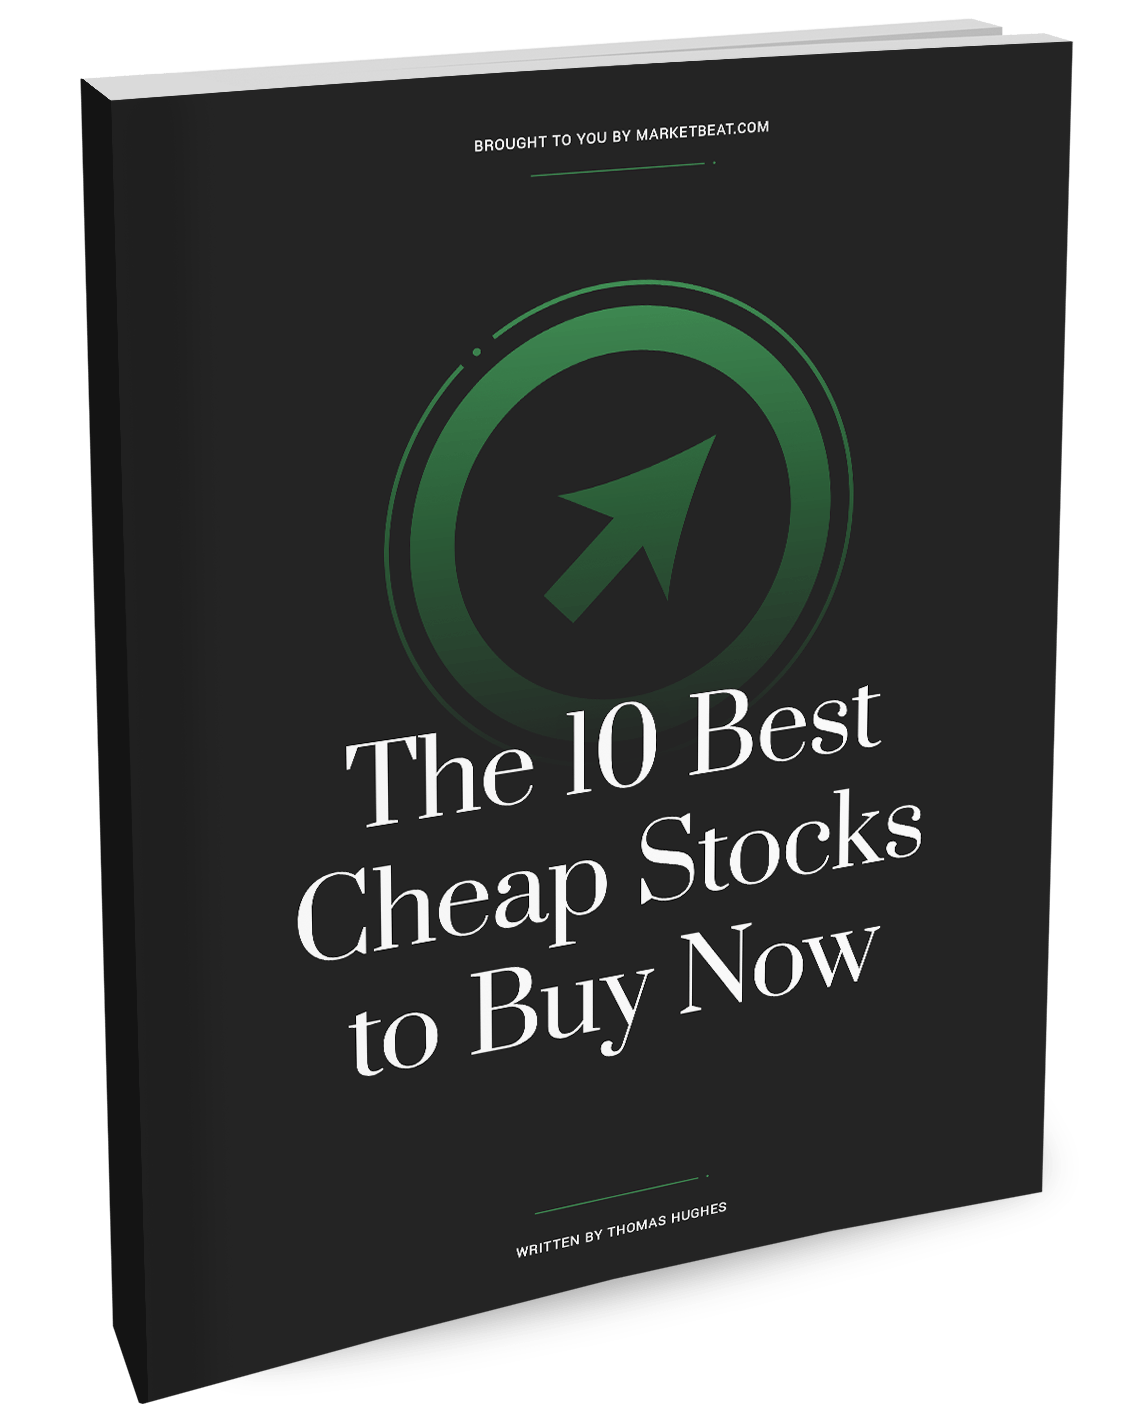 10 Best Stocks to Buy Now Cover